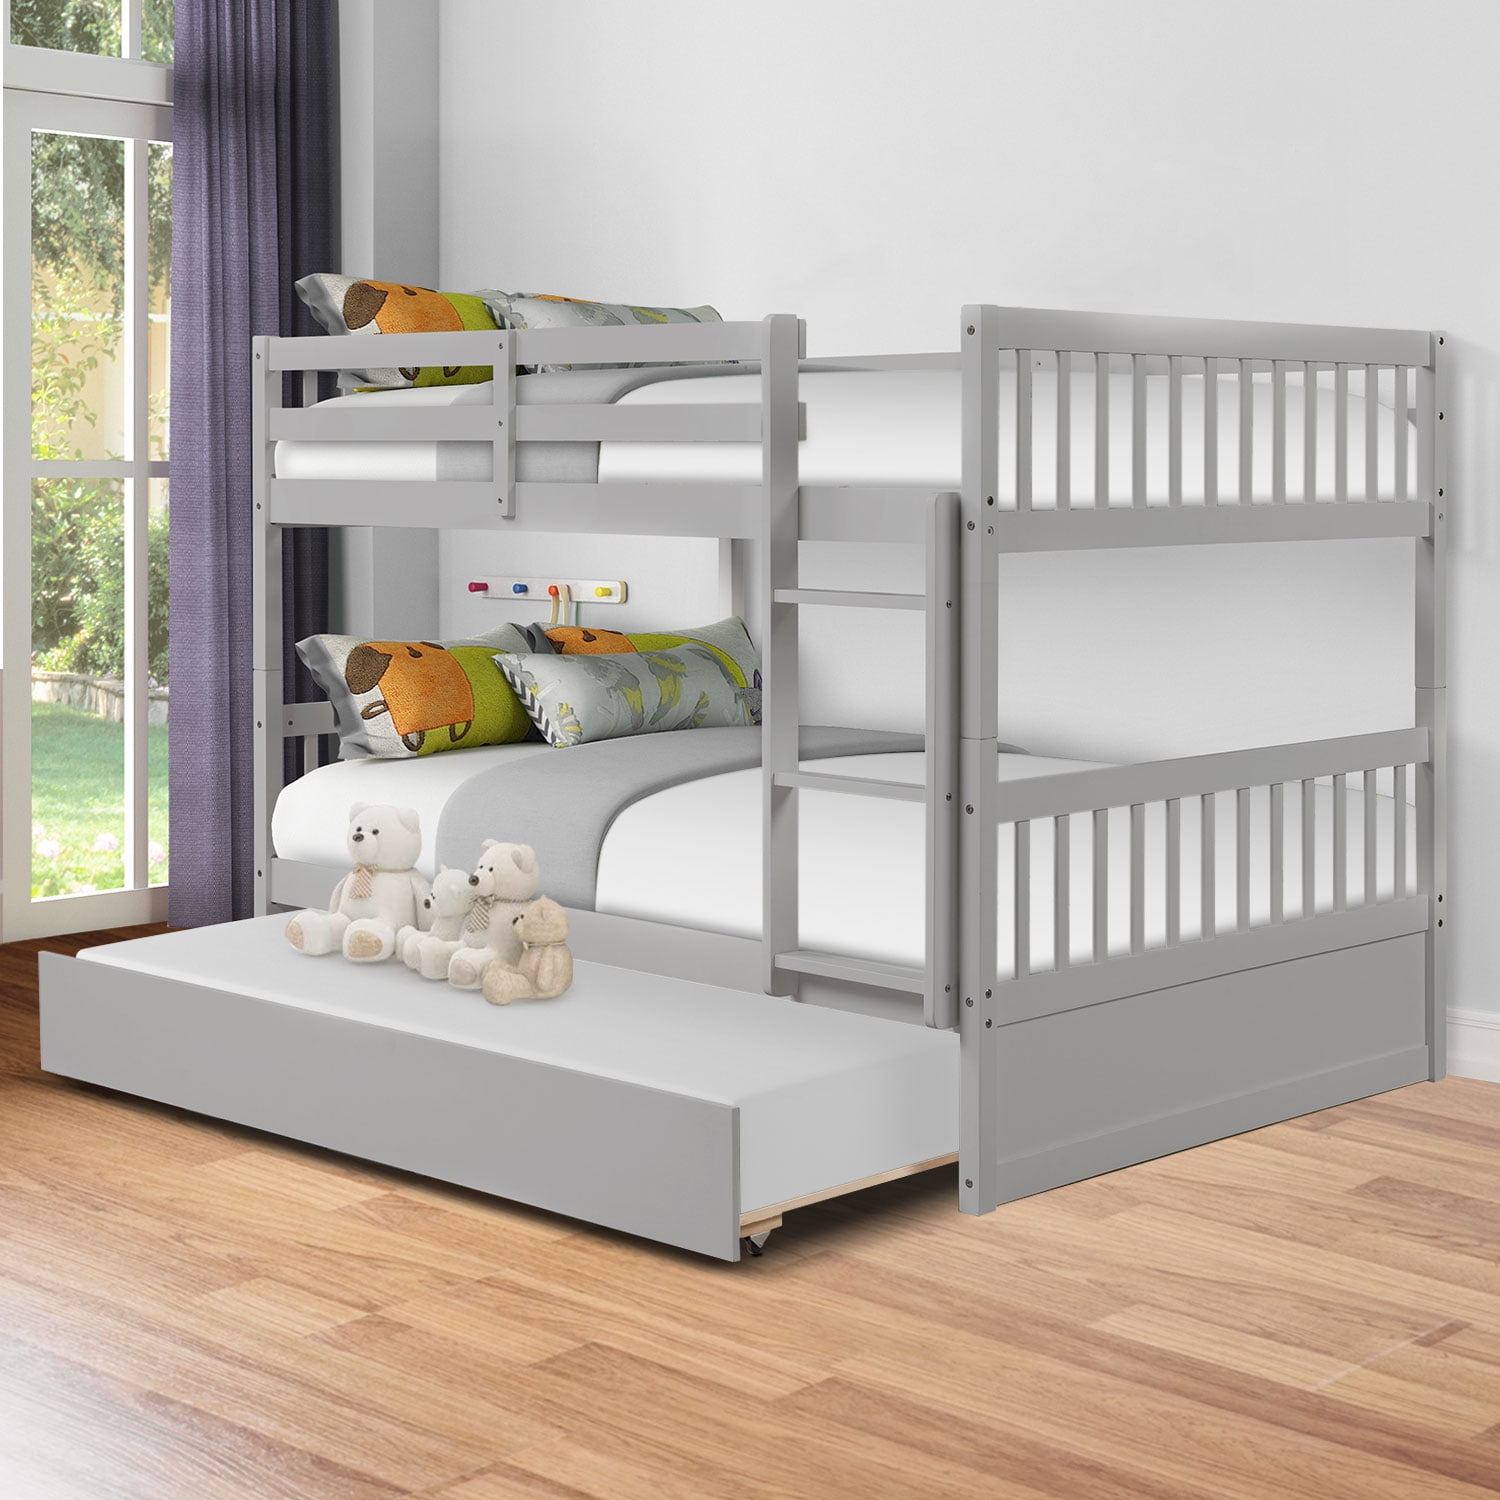 Trundle Sweden Pine Wood Bunk Beds, Convertible Bunk Beds Full Over Full